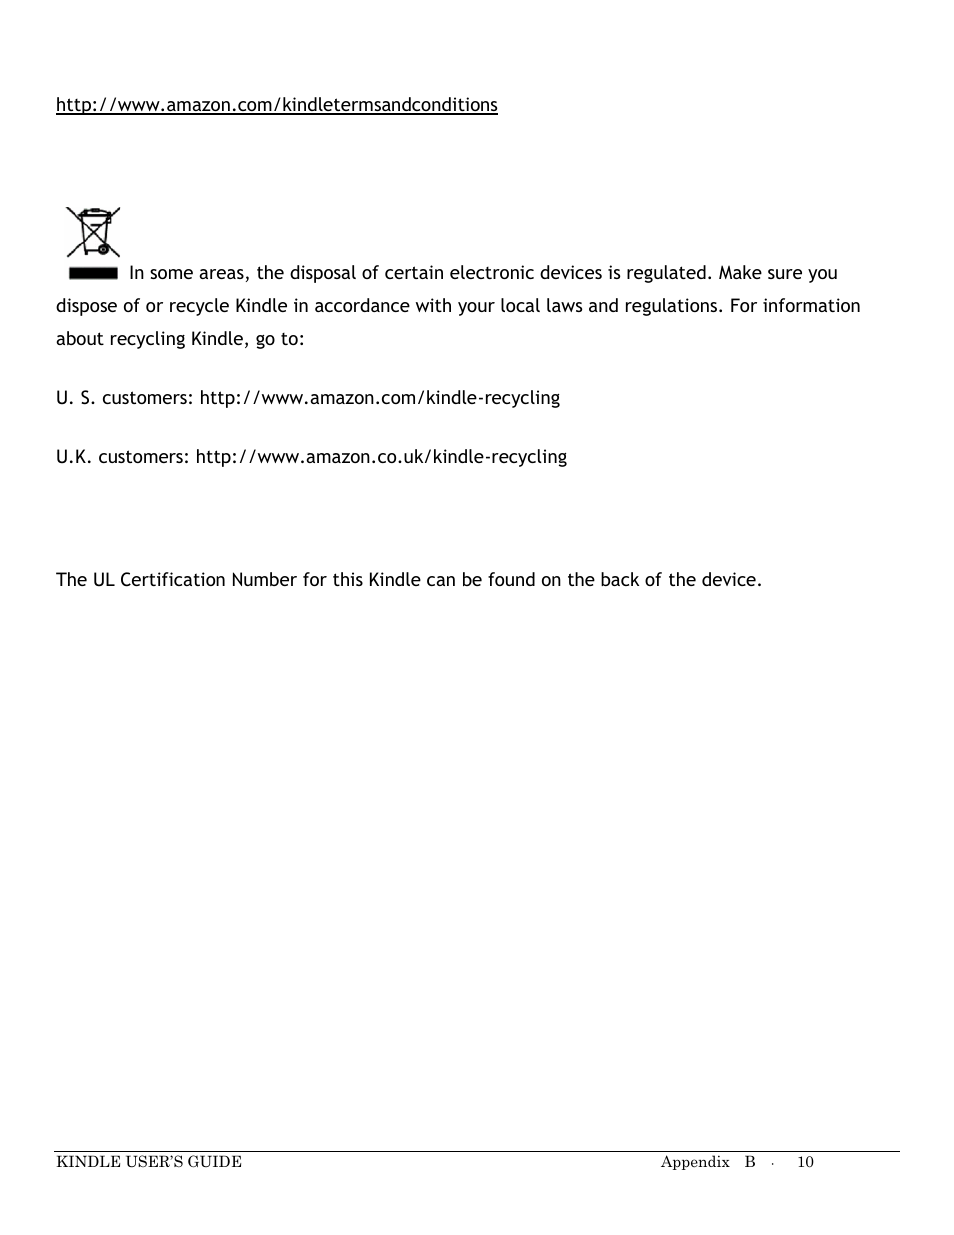 Recycling kindle properly, Ul certification number | Kindle Keyboard User Manual | Page 10 / 28